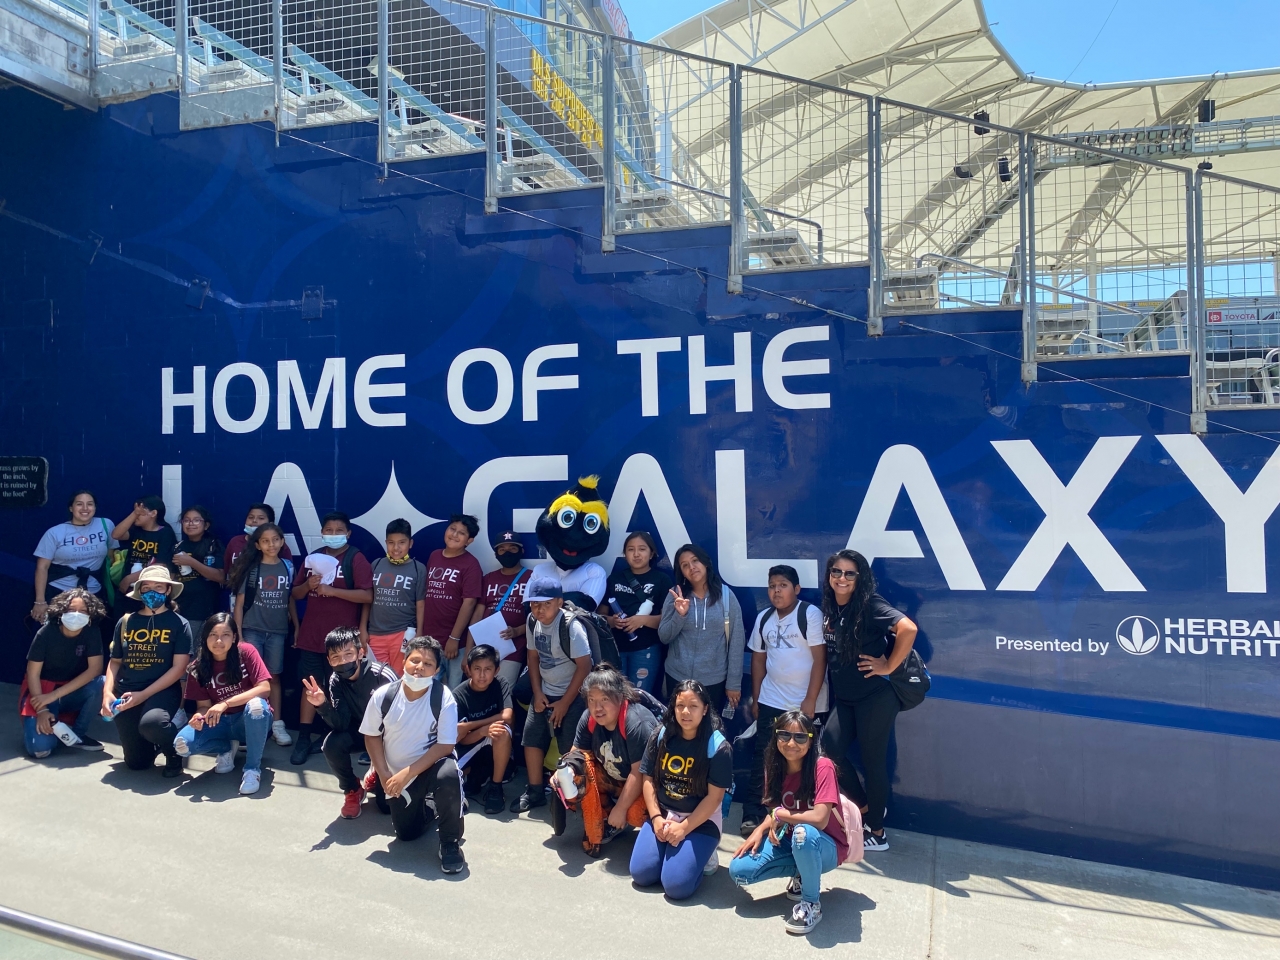 Youth participants enrolled in the Hope Street summer program spend the afternoon enjoying a specially designed LA Galaxy Youth Soccer Clinic, working directly with club coaching staff and LA Galaxy mascot Cozmo at Dignity Health Sports Park on July 9, 2021.